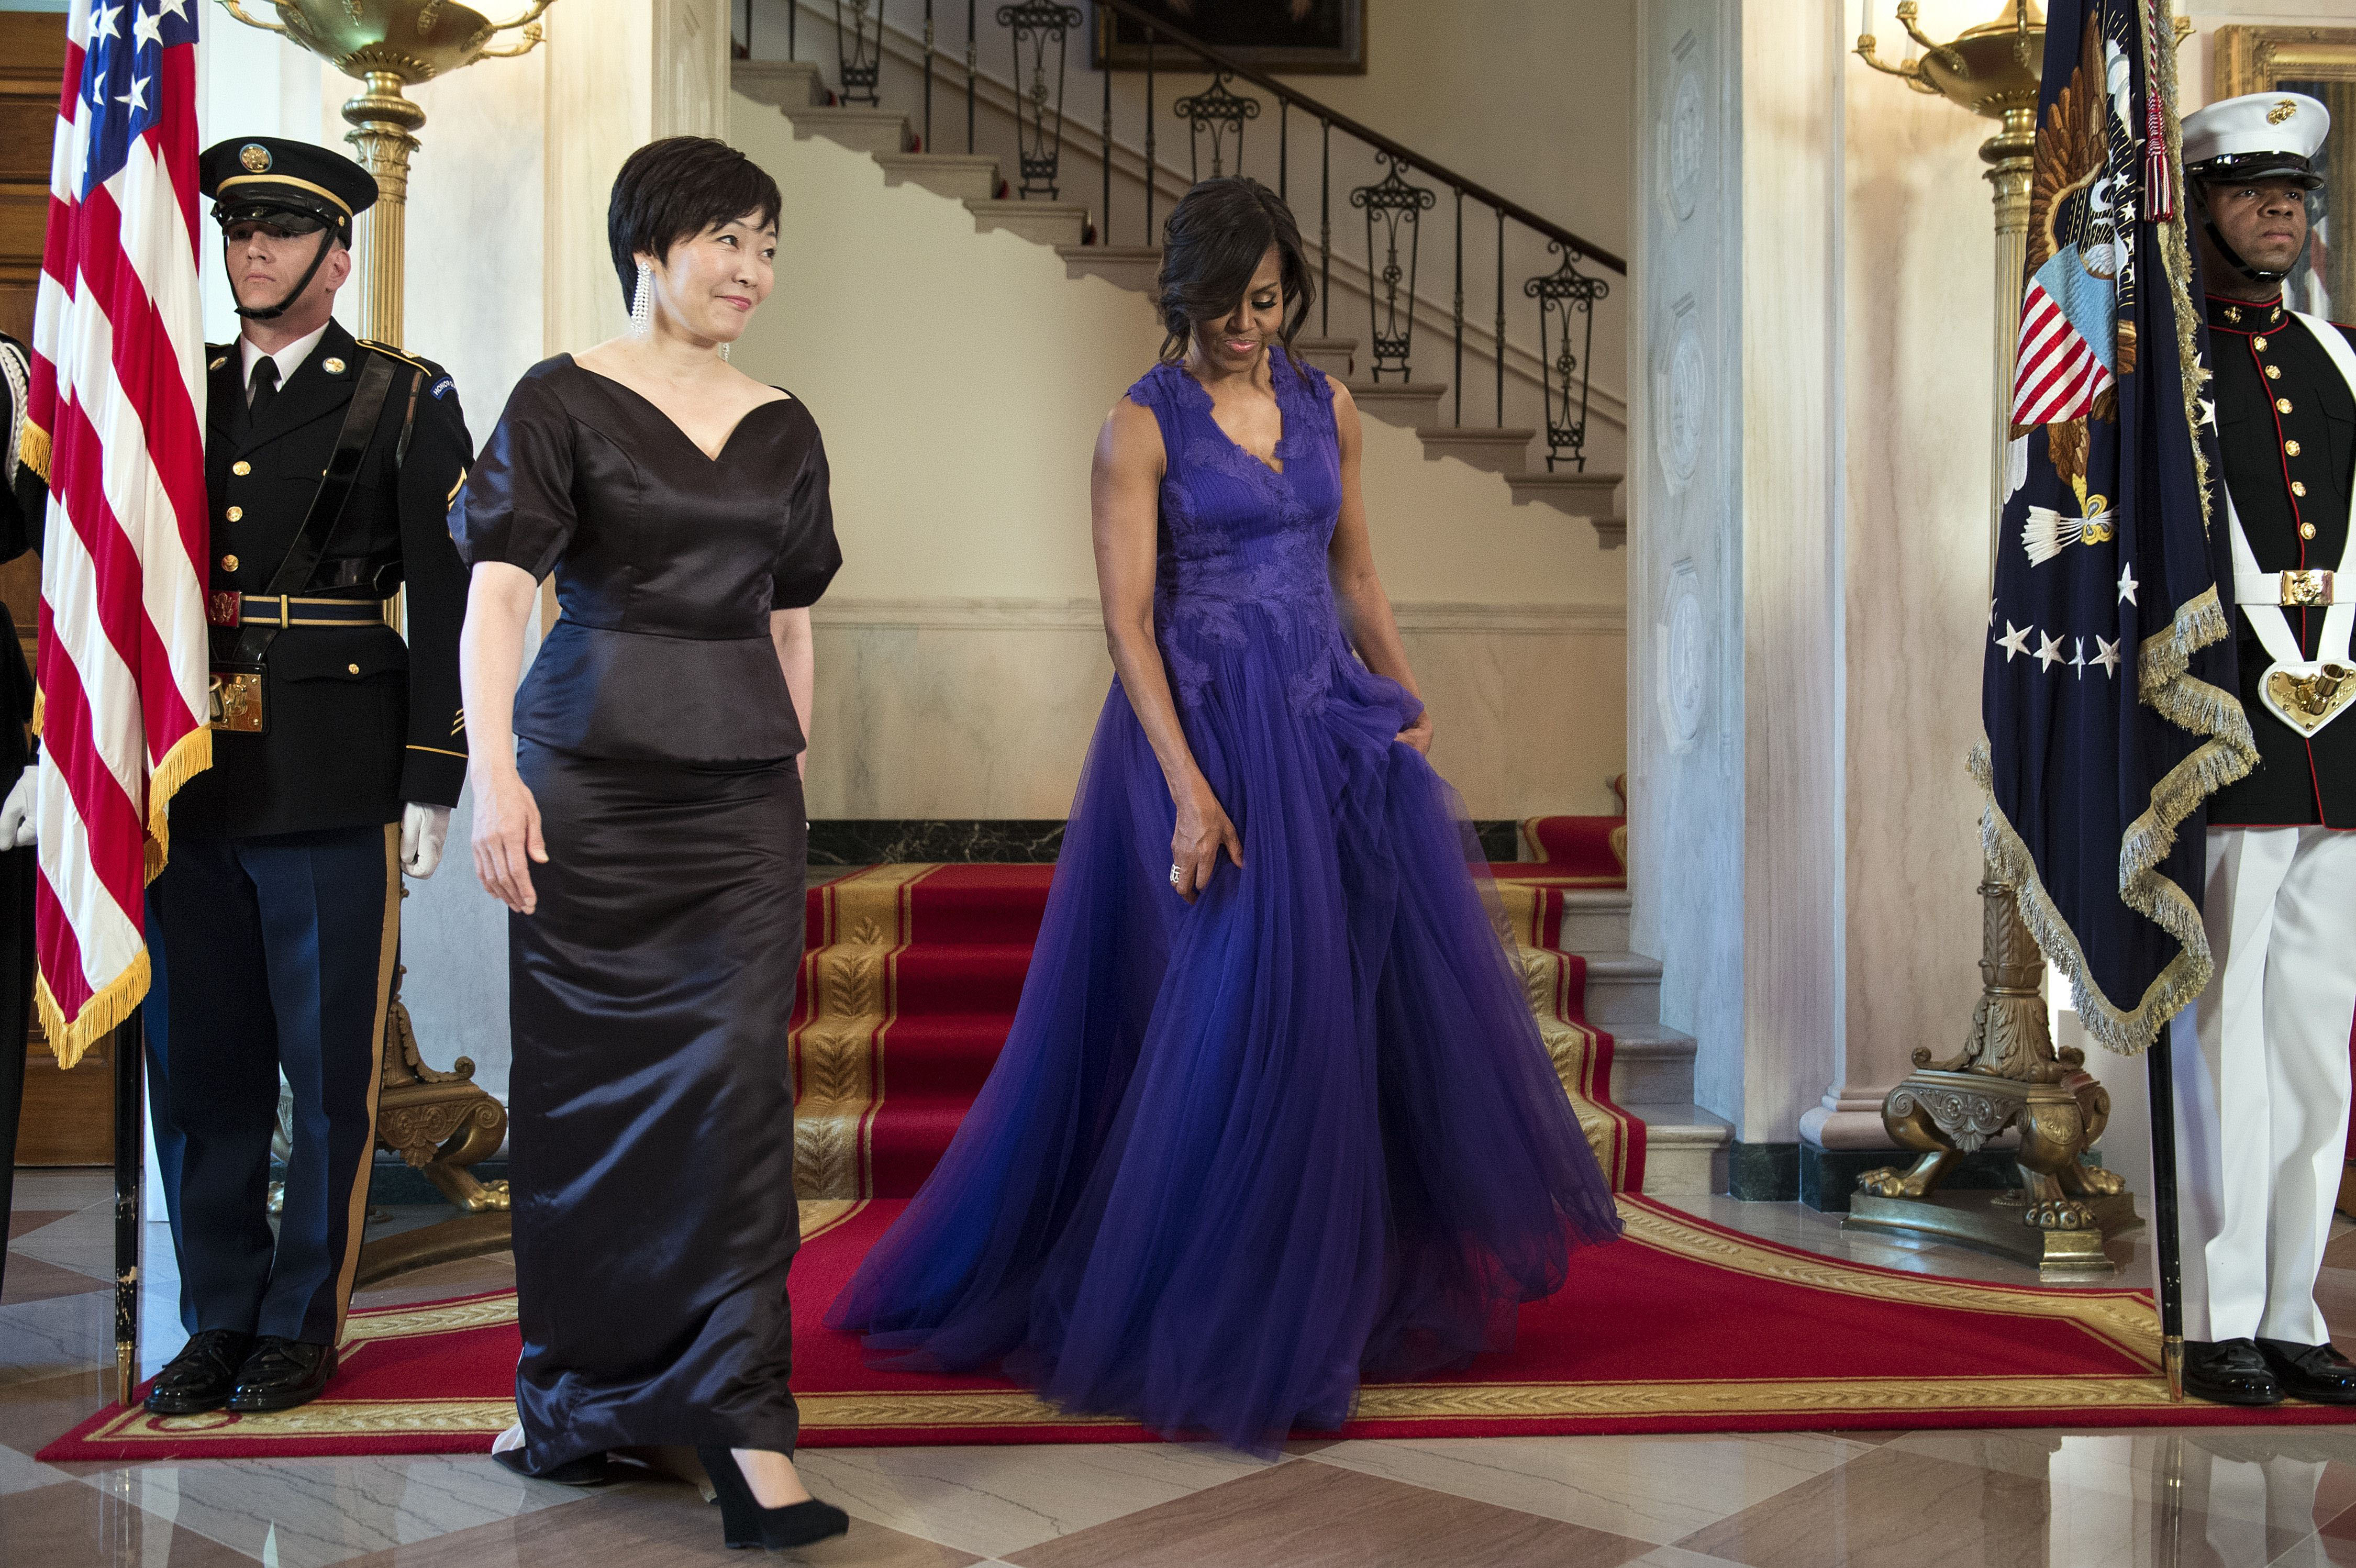 Akie Abe and First Lady Michelle Obama walk to a state dinner at the White House in Washington on April 28, 2015.